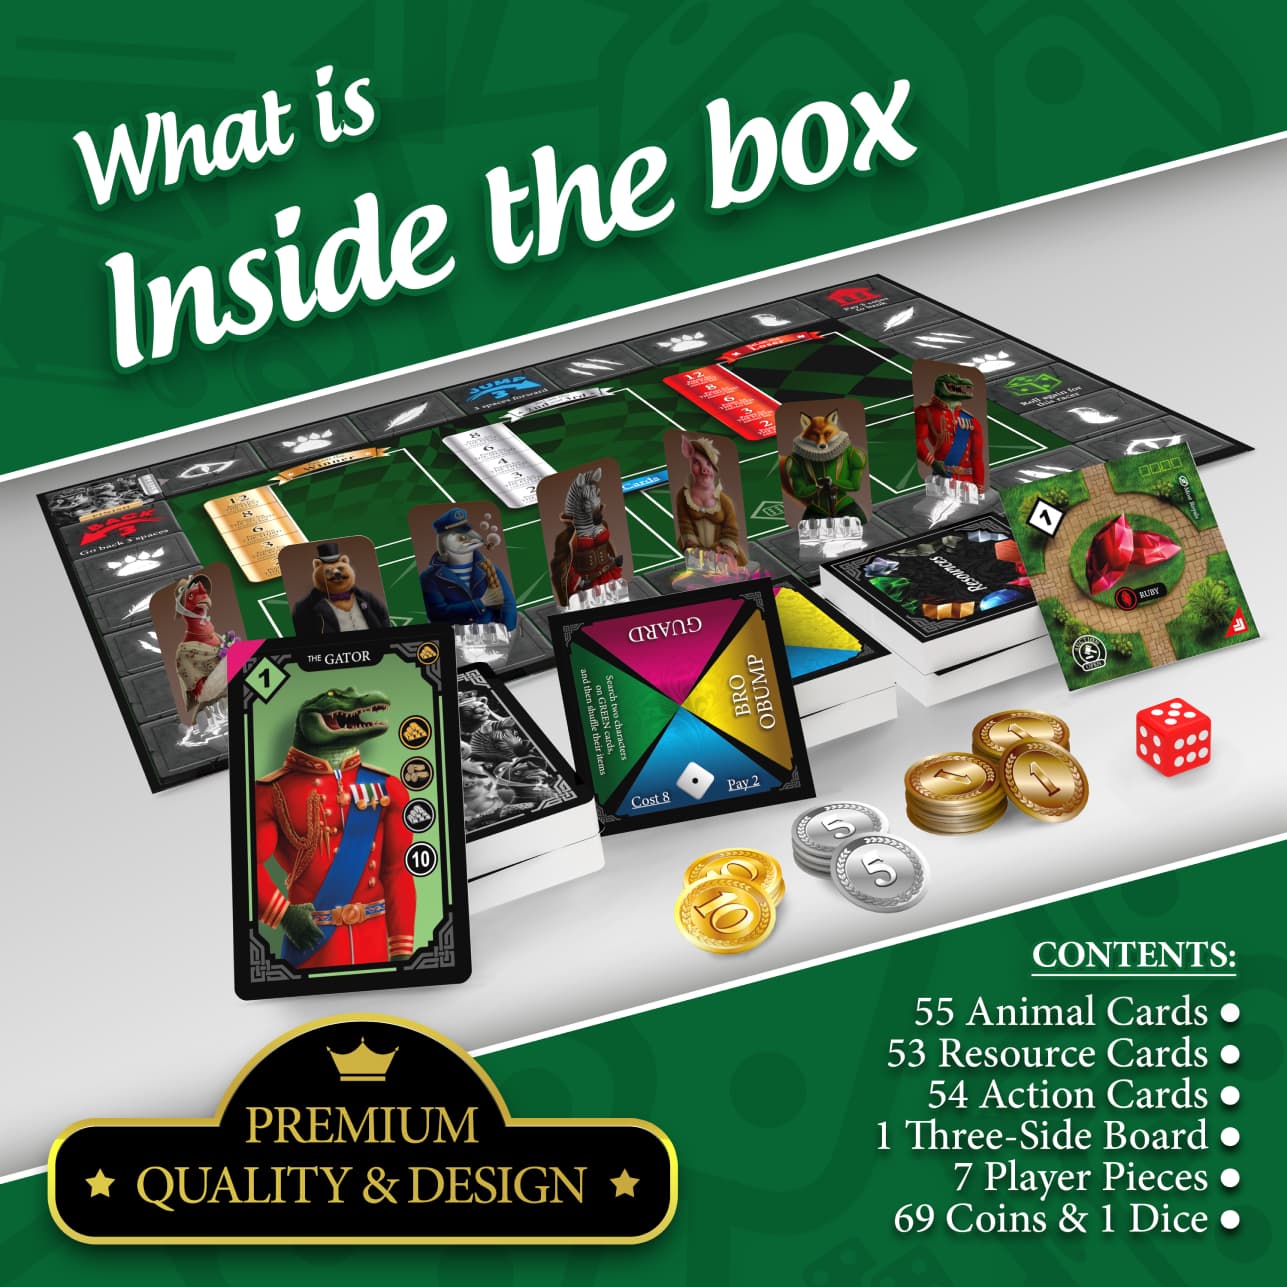 What is inside the box